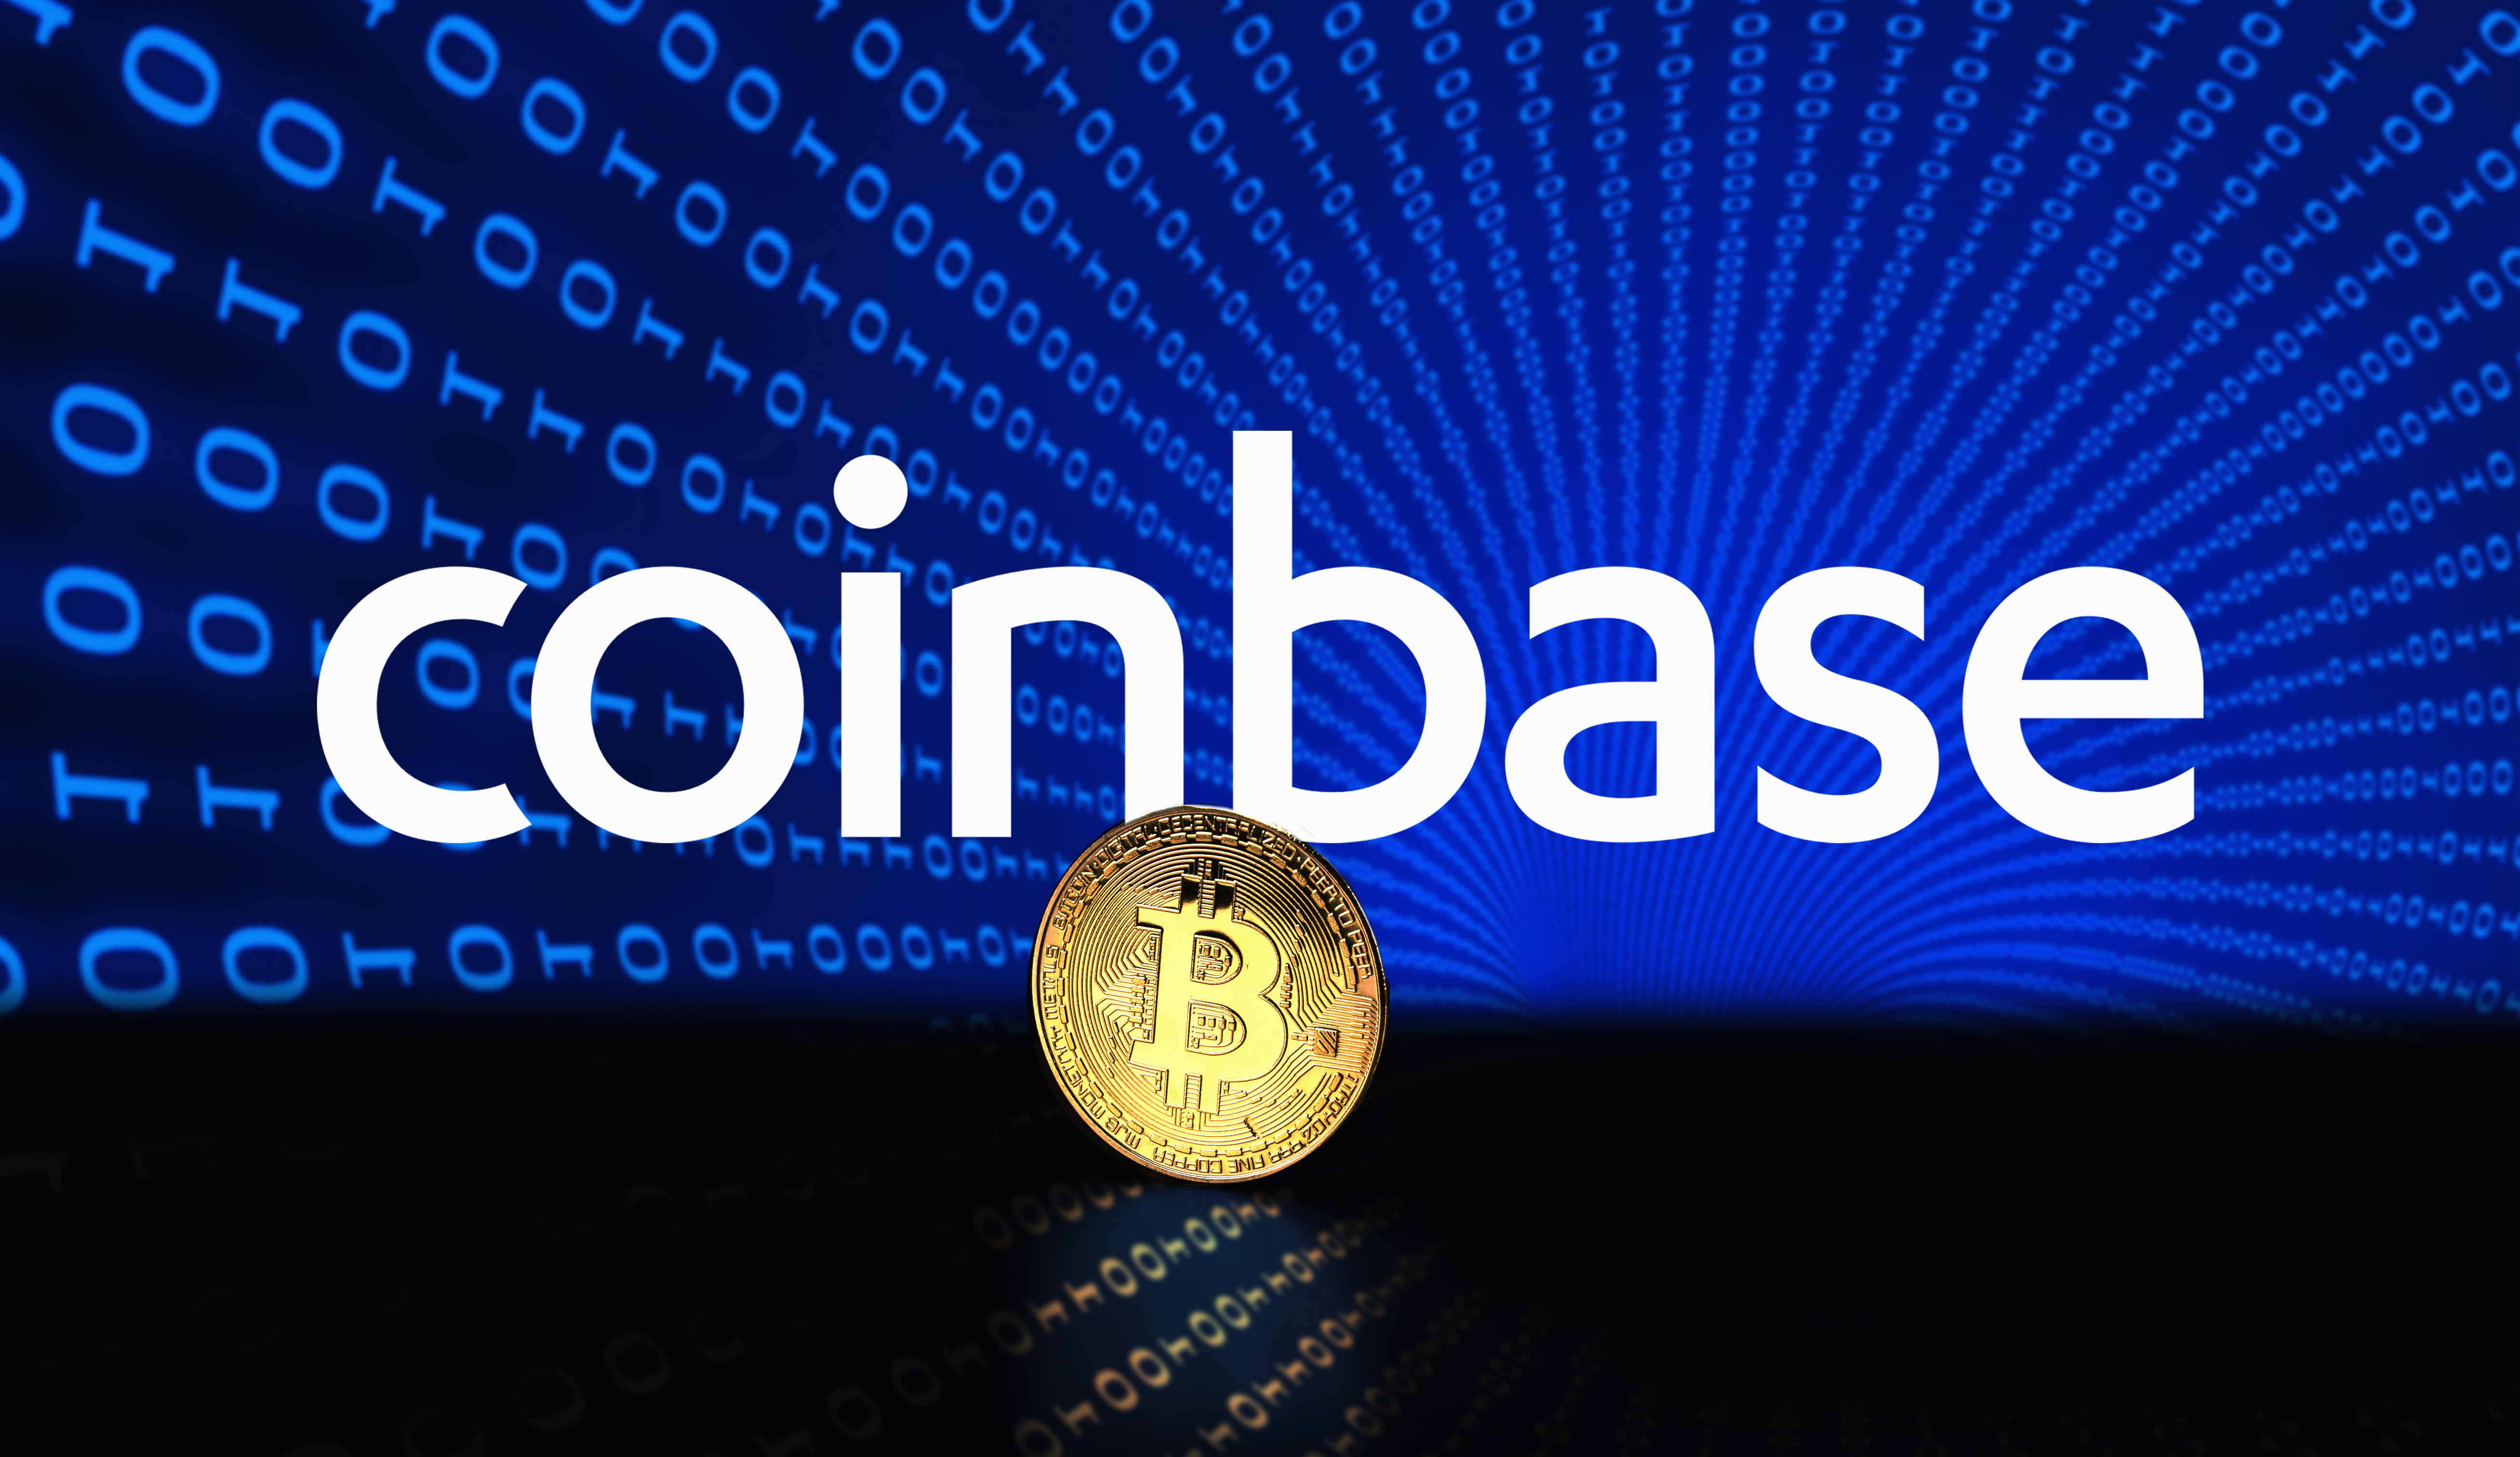 SEC files charges against Coinbase for U.S. securities law violations, stock tumbles